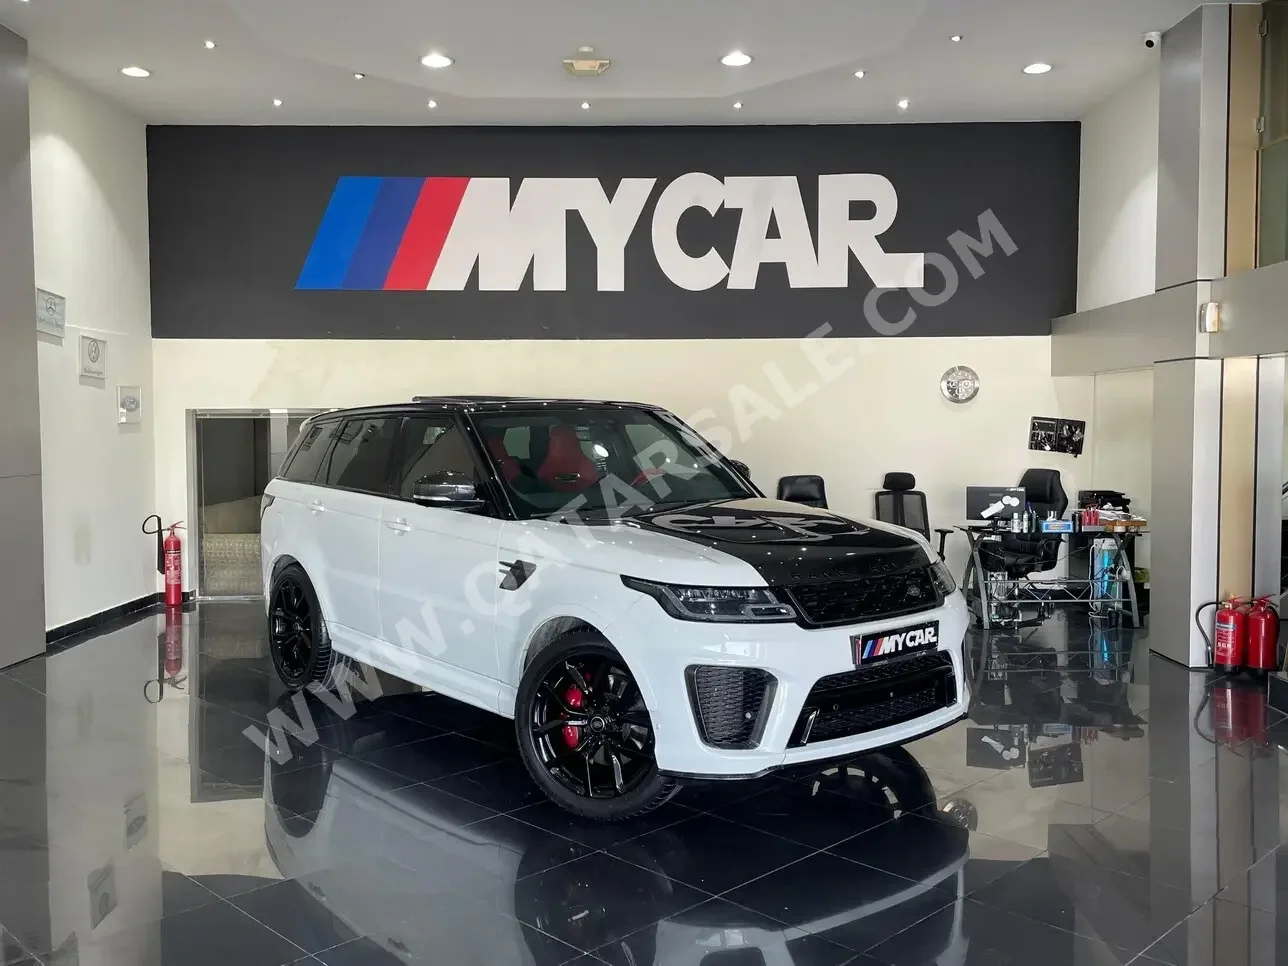 Land Rover  Range Rover  Sport SVR  2019  Automatic  86,000 Km  8 Cylinder  Four Wheel Drive (4WD)  SUV  White  With Warranty